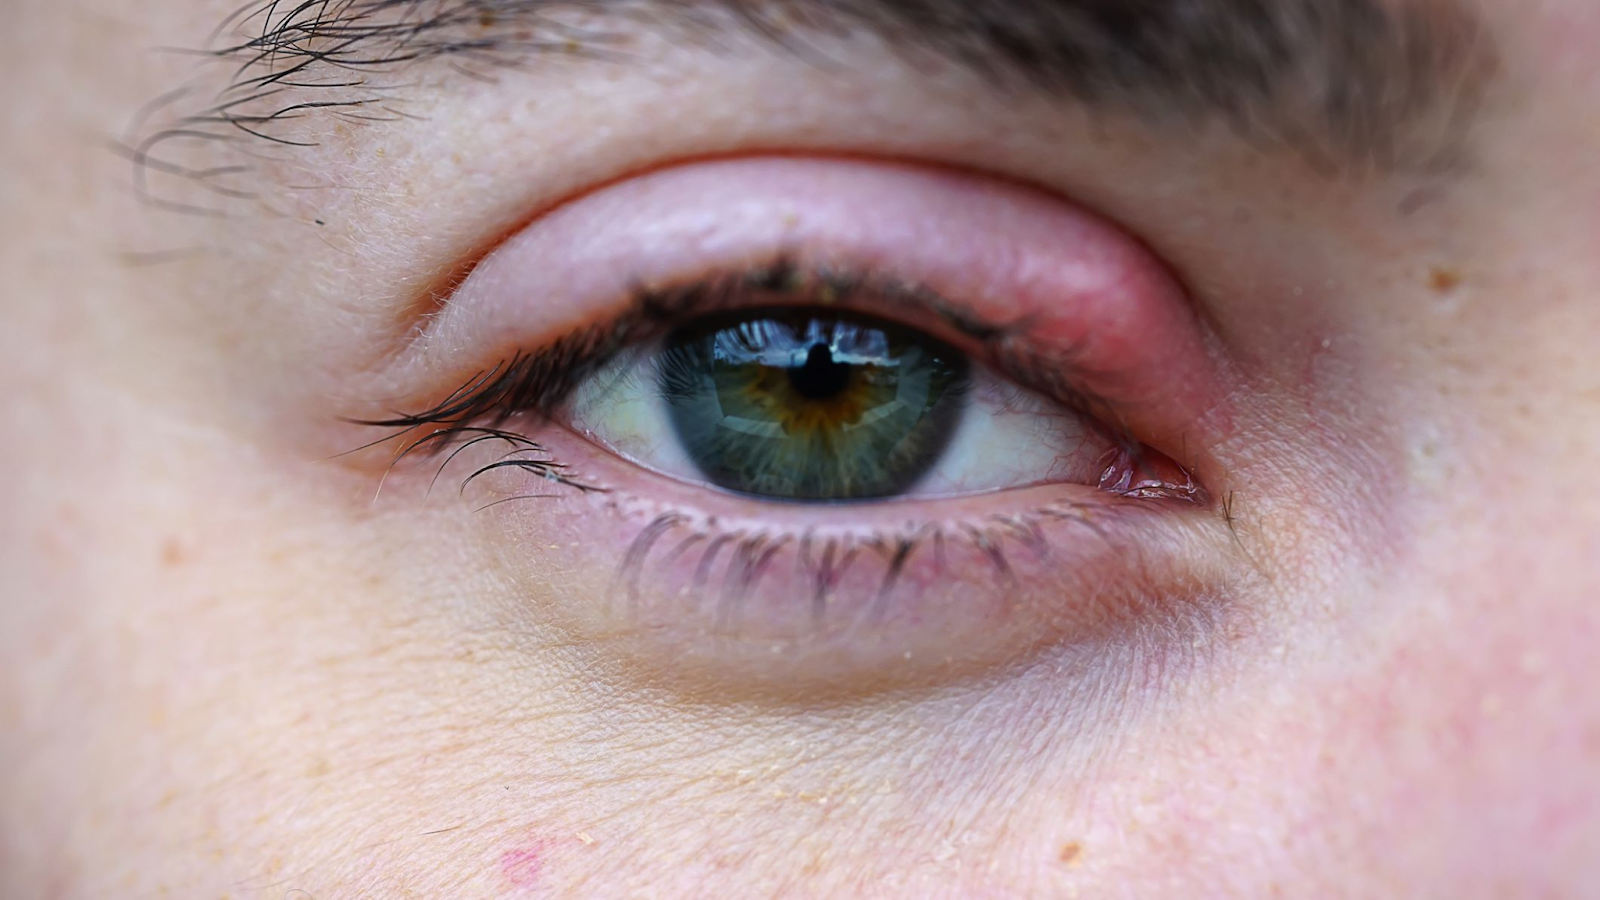 Styes: See How to Treat Prevent Painful Stye Eyes